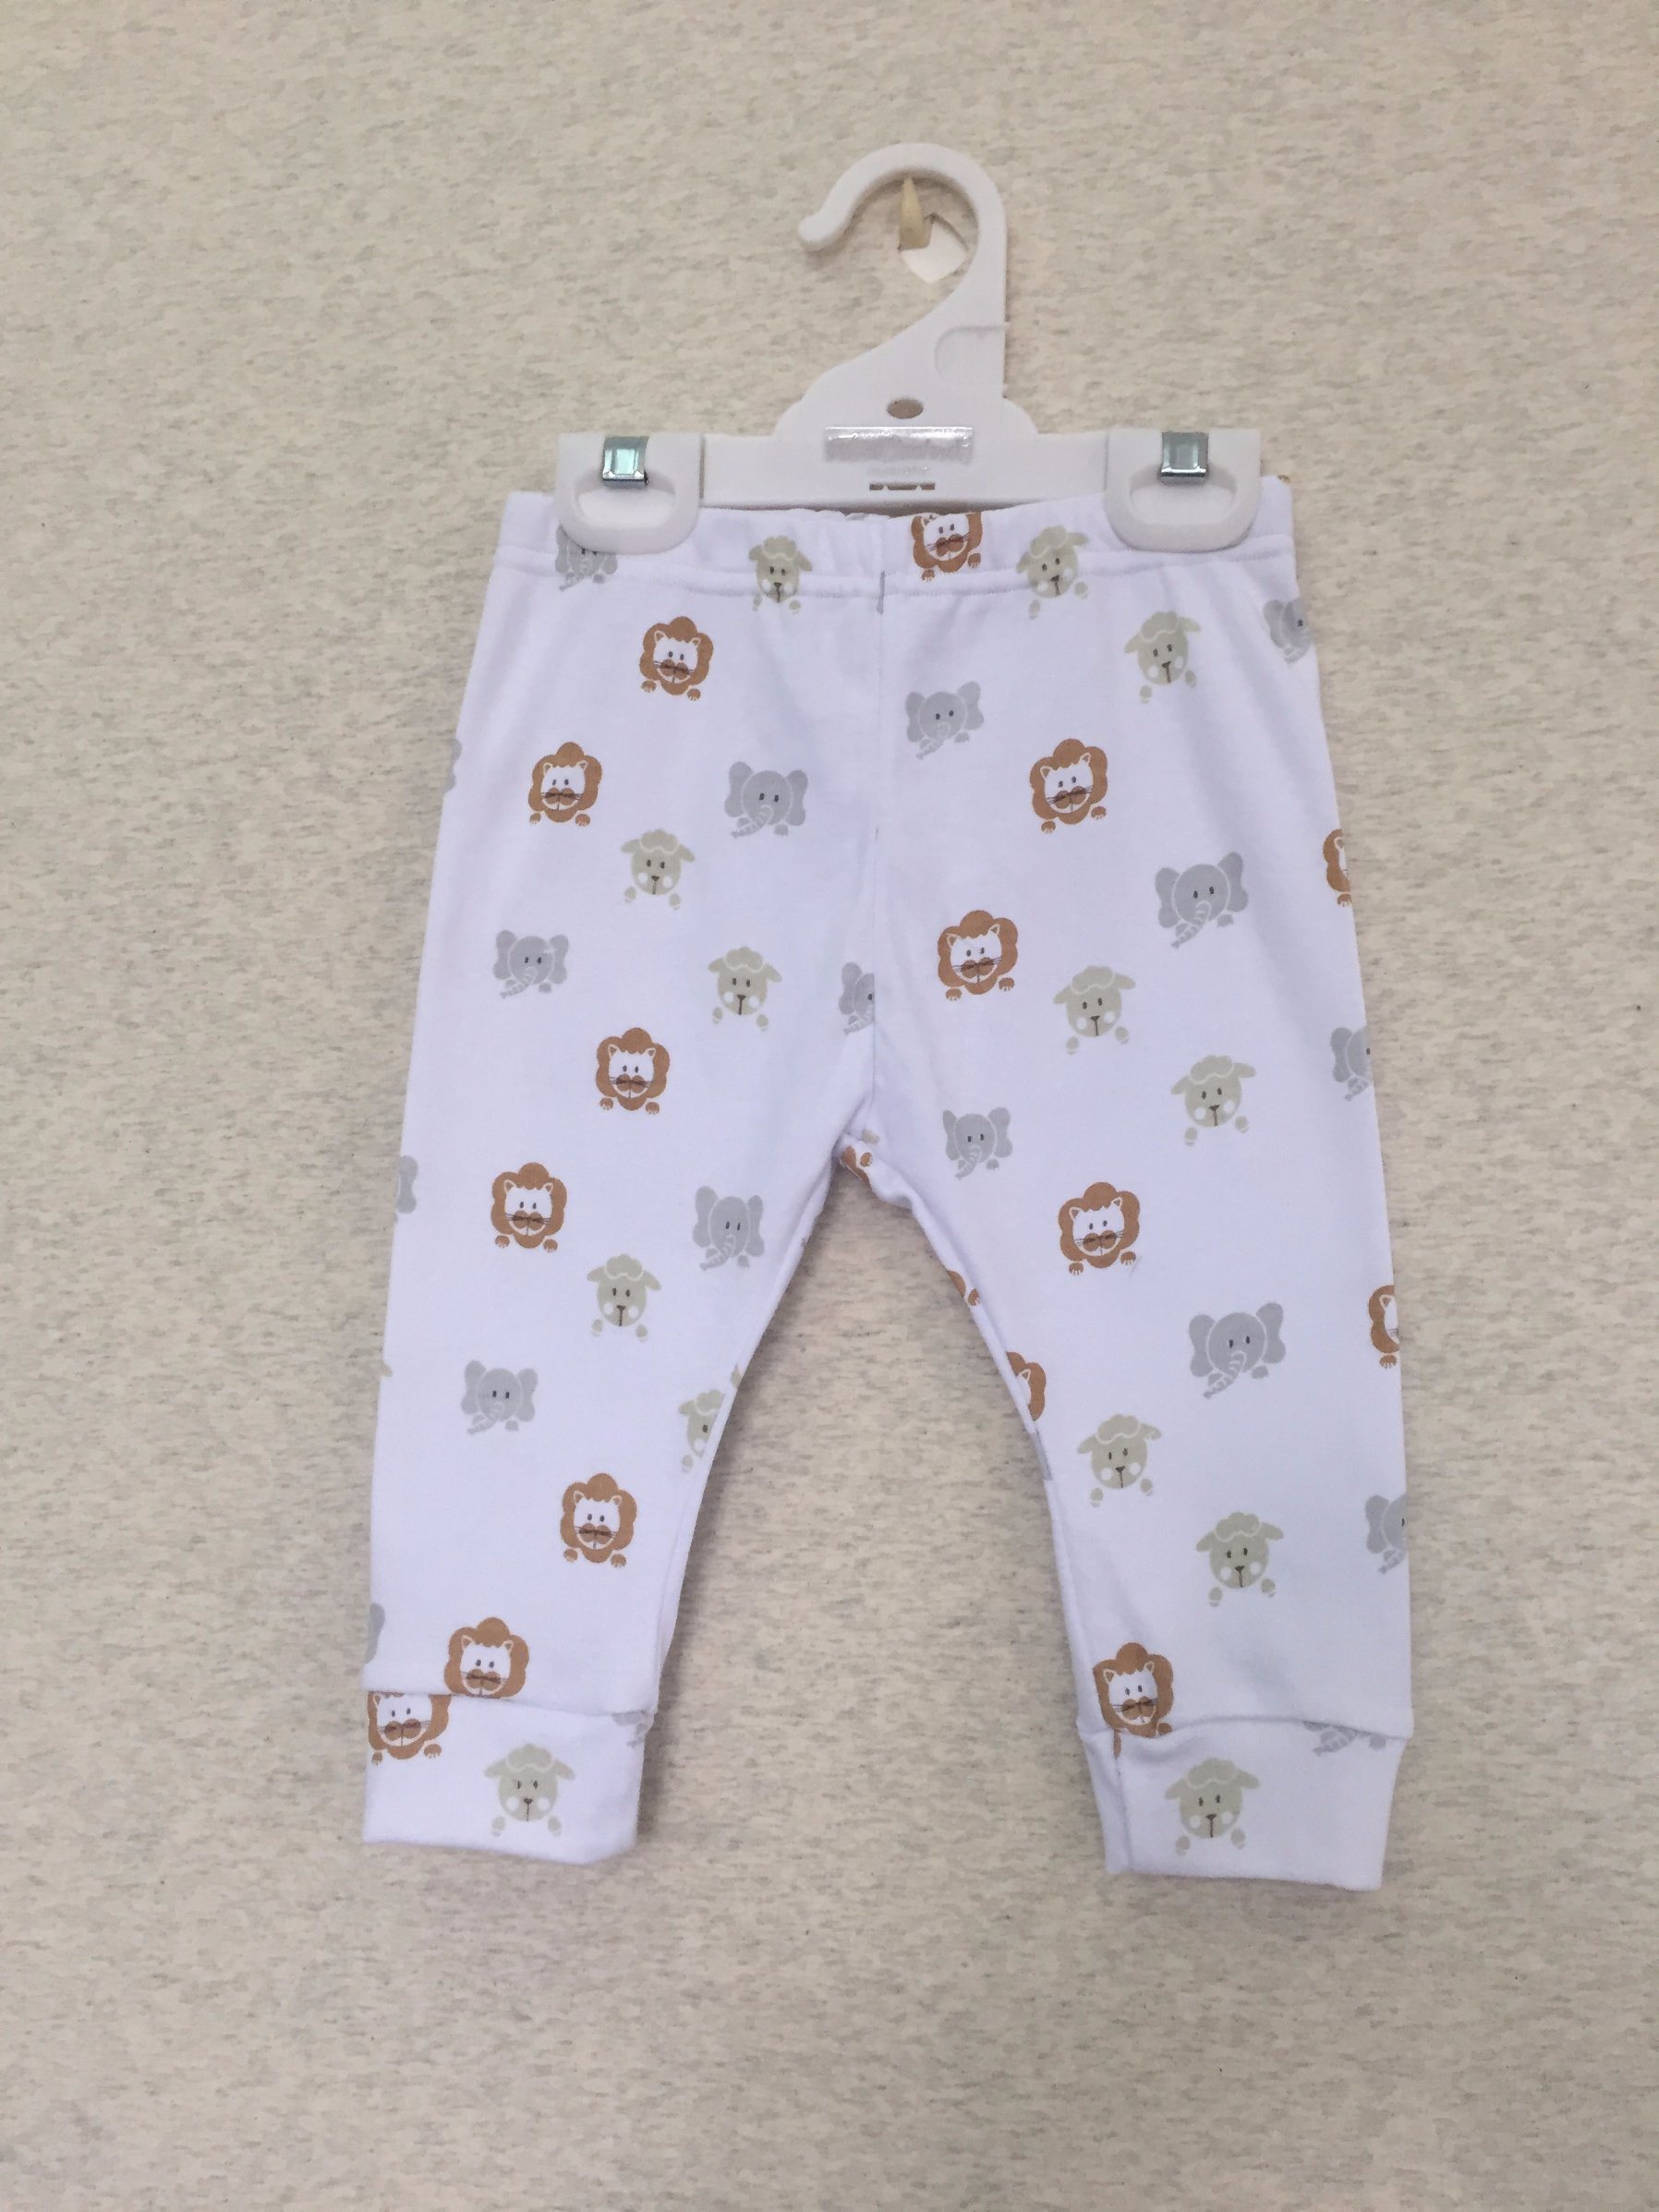 100% Combed Cotton Baby Legging Baby Pants Baby Wear